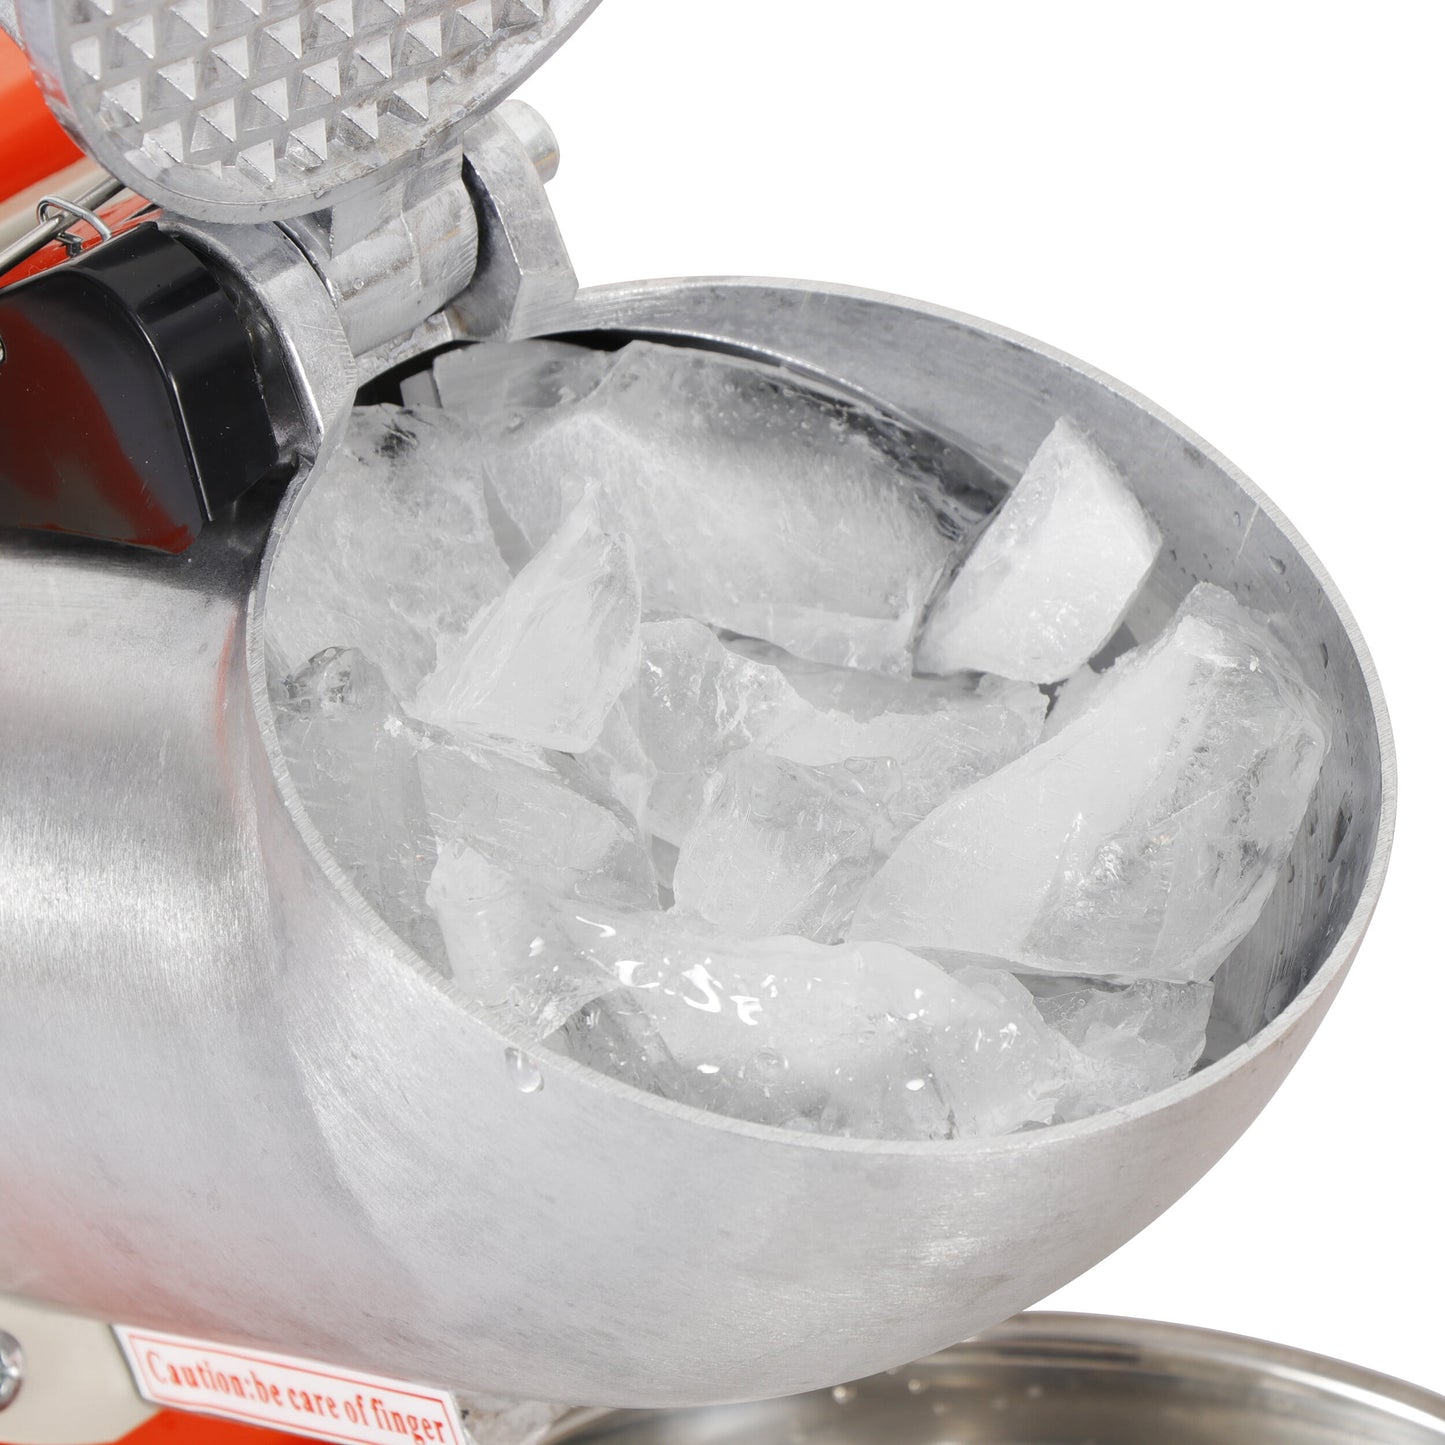 SuperDeal Ice Shaver Machine 300W Electric Ice Crusher Cold Drink Smoothie Making w/Bowl, Orange